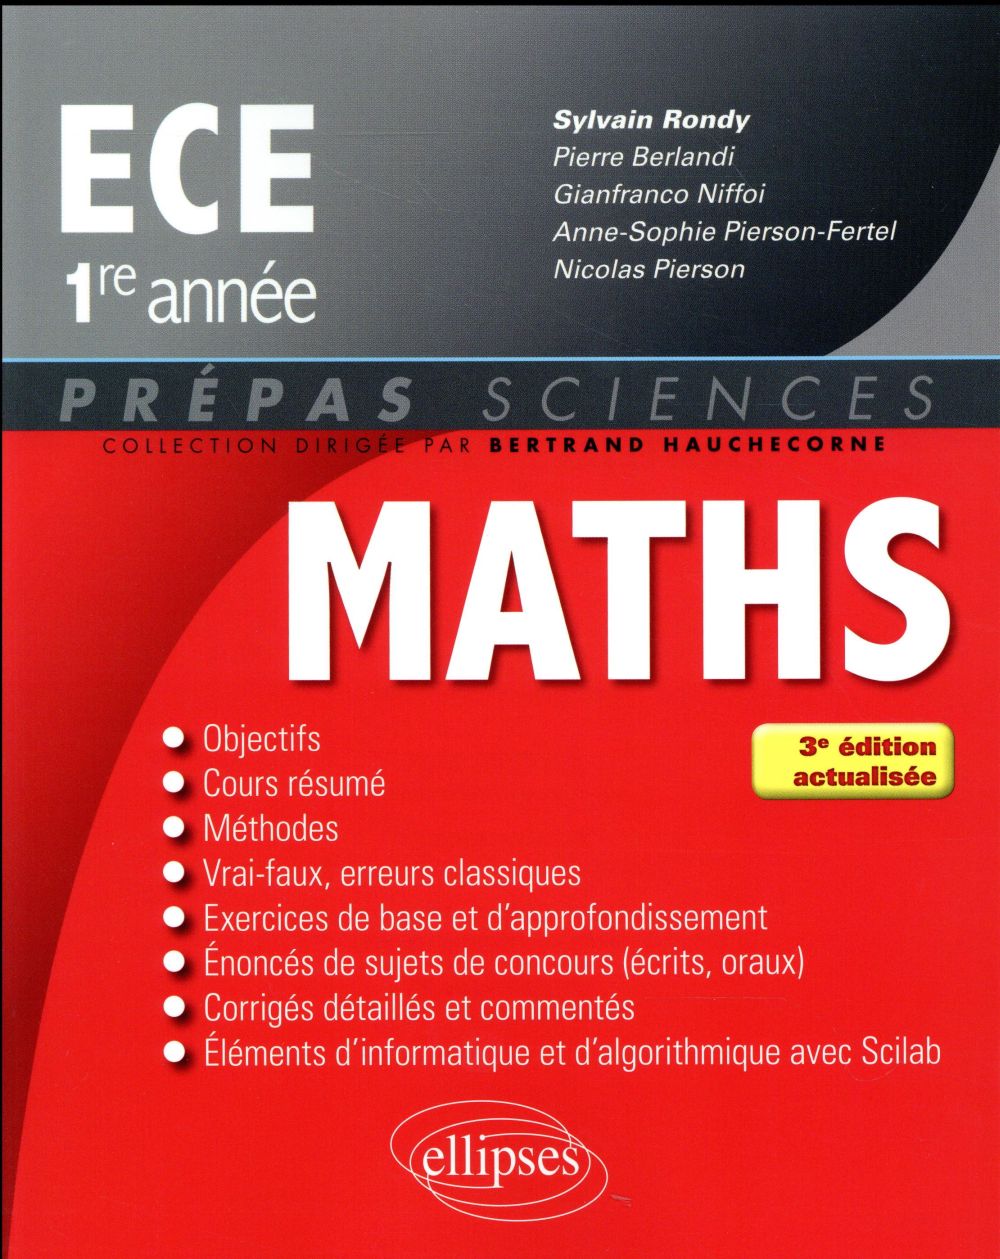 MATHEMATIQUES ECE 1RE ANNEE - 3E EDITION ACTUALISEE